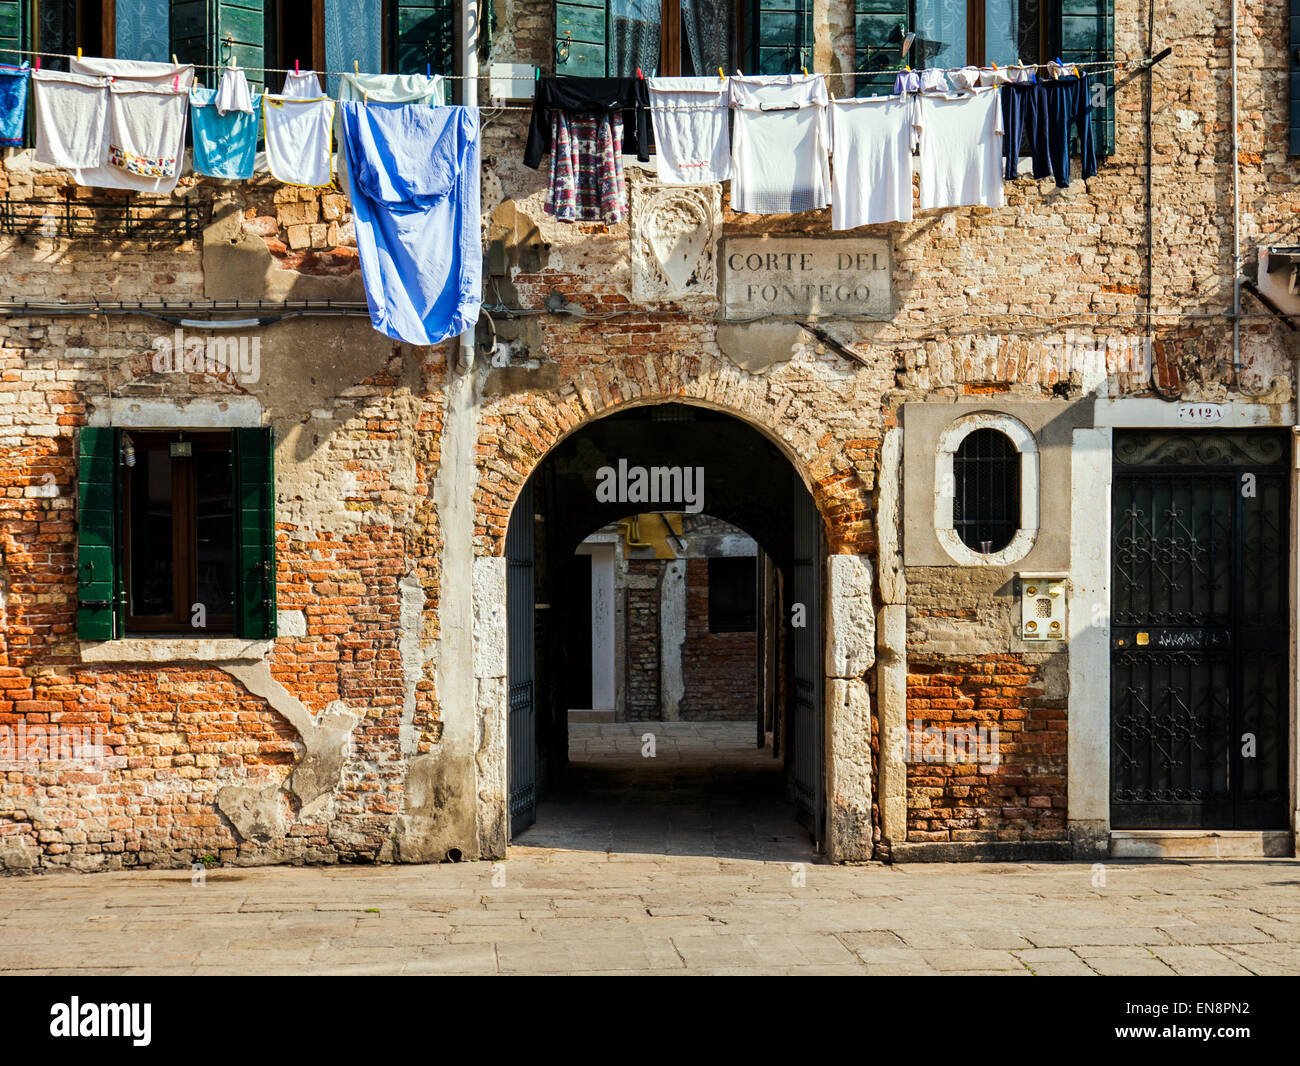 Laundry hangs to dry, Venice, Italy, City of Canals Stock Photo